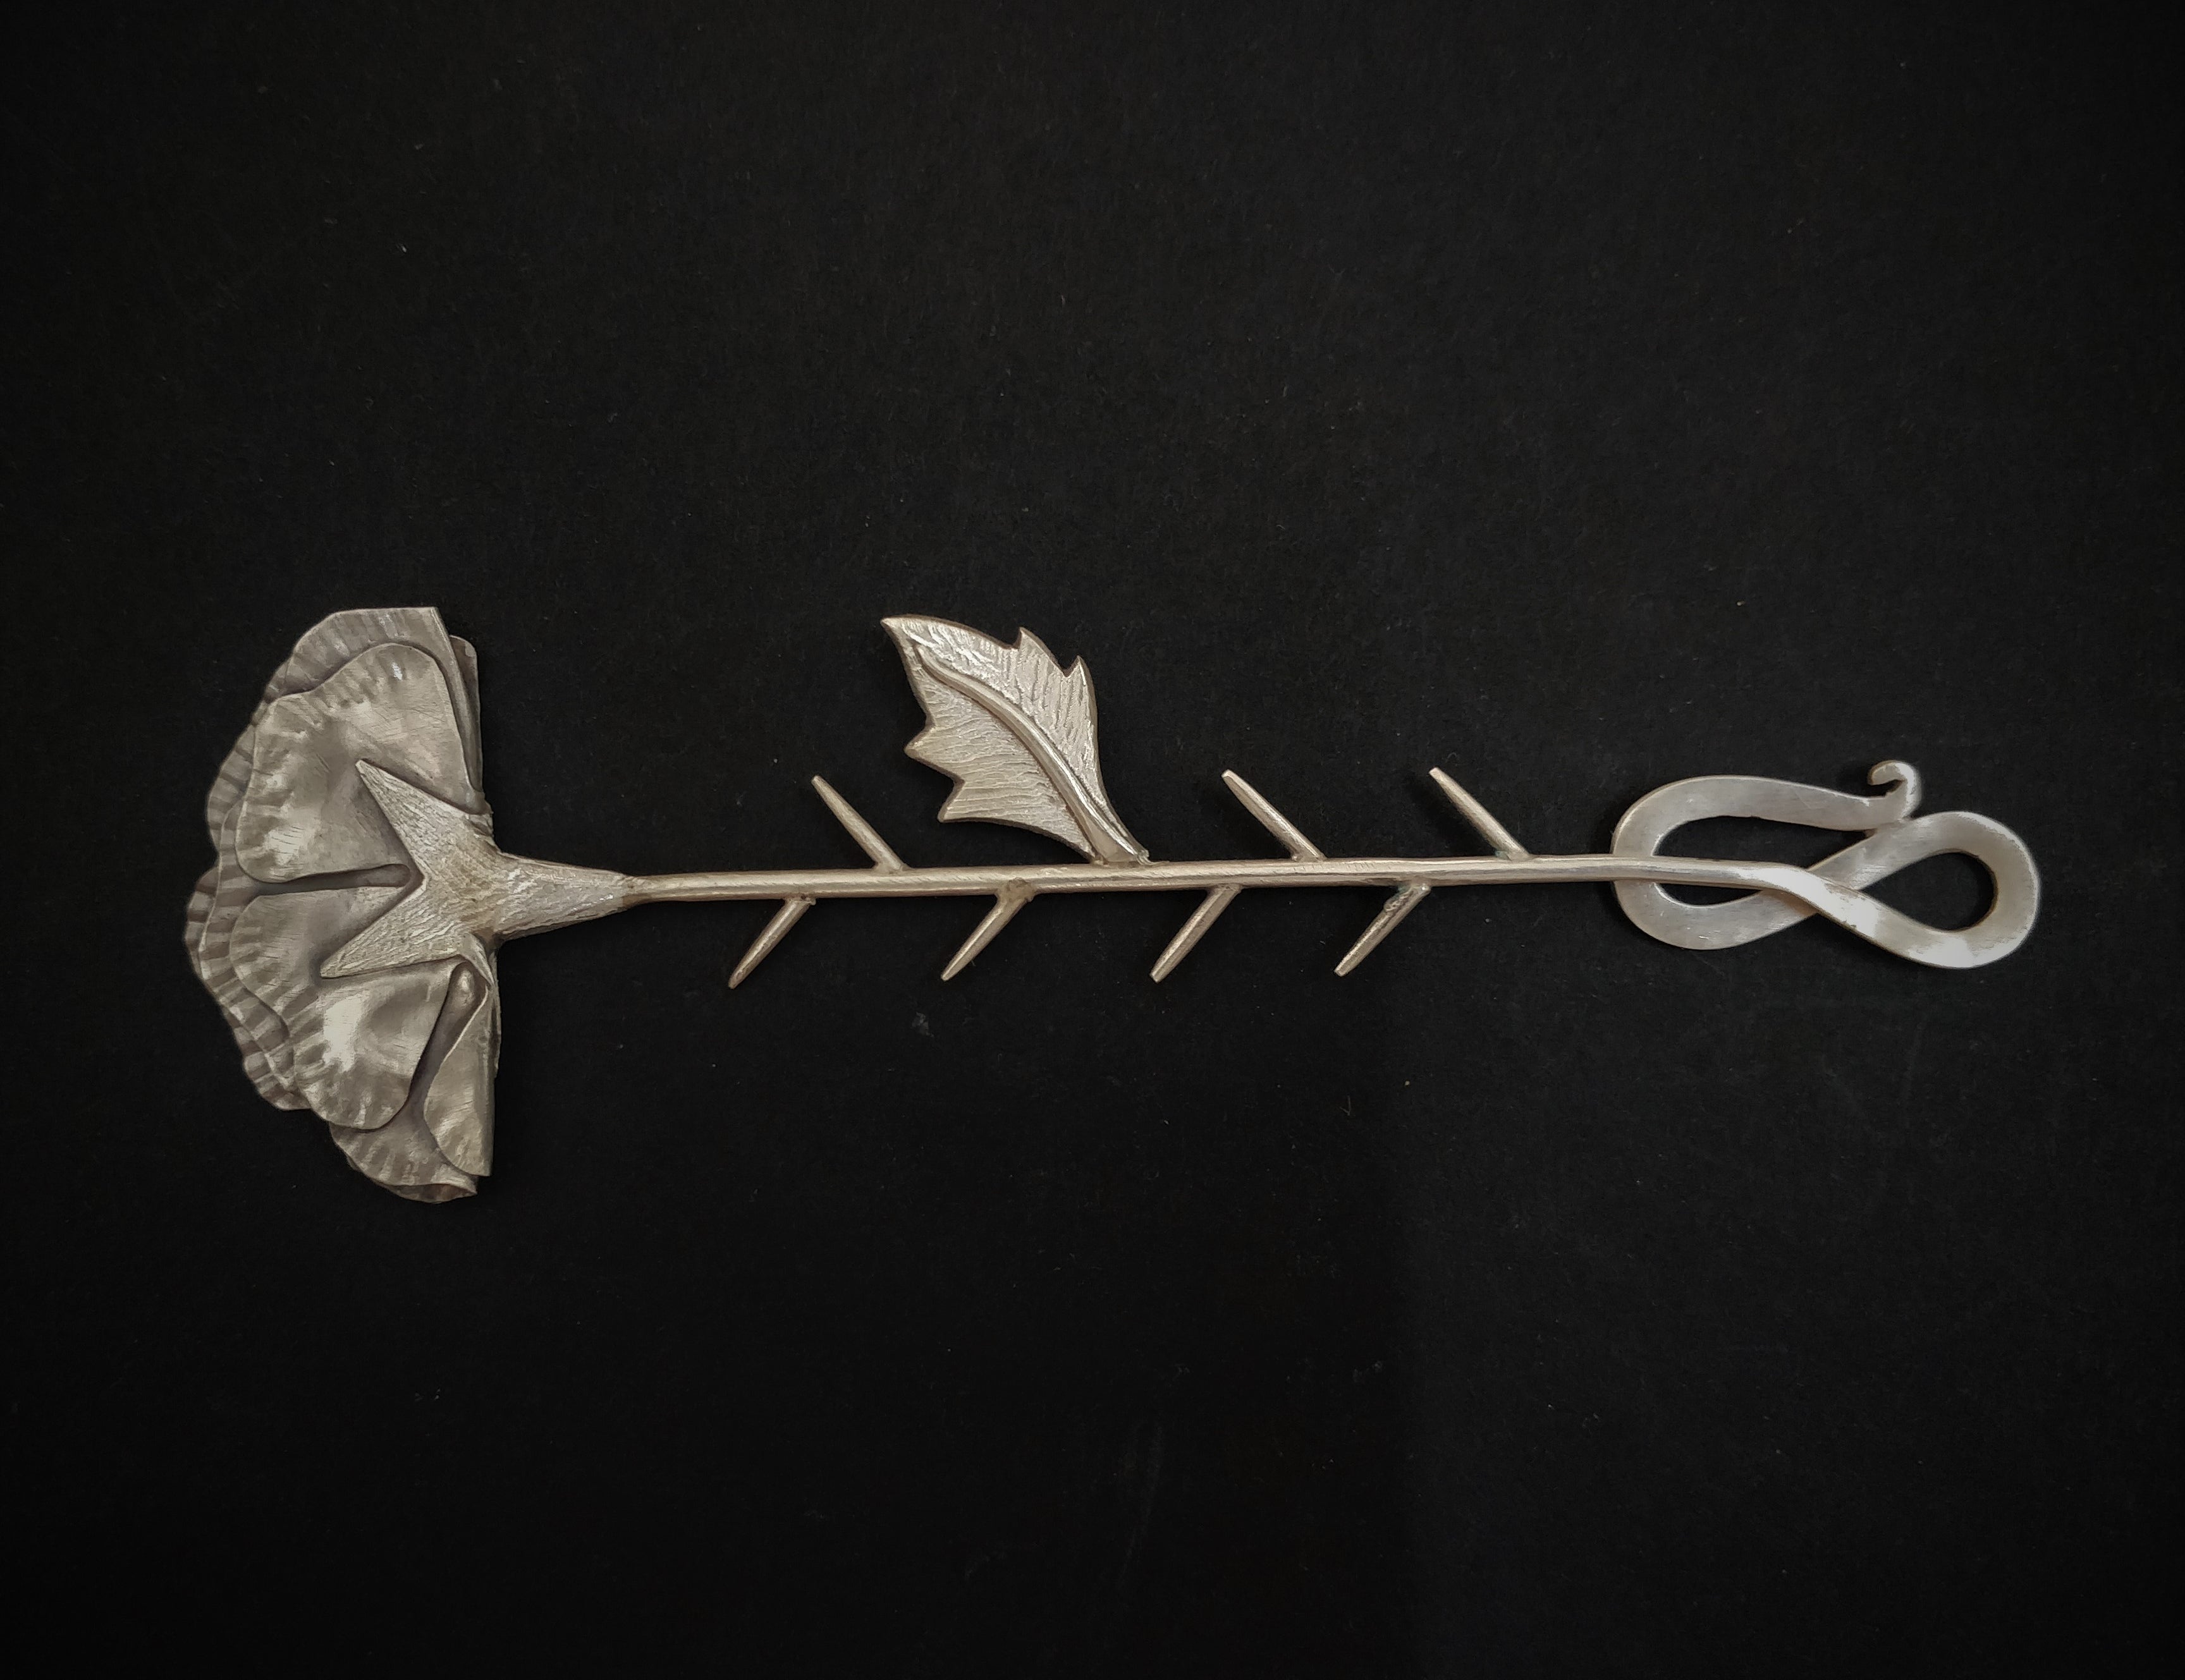 Buy beautiful and creative silver flower bookmark